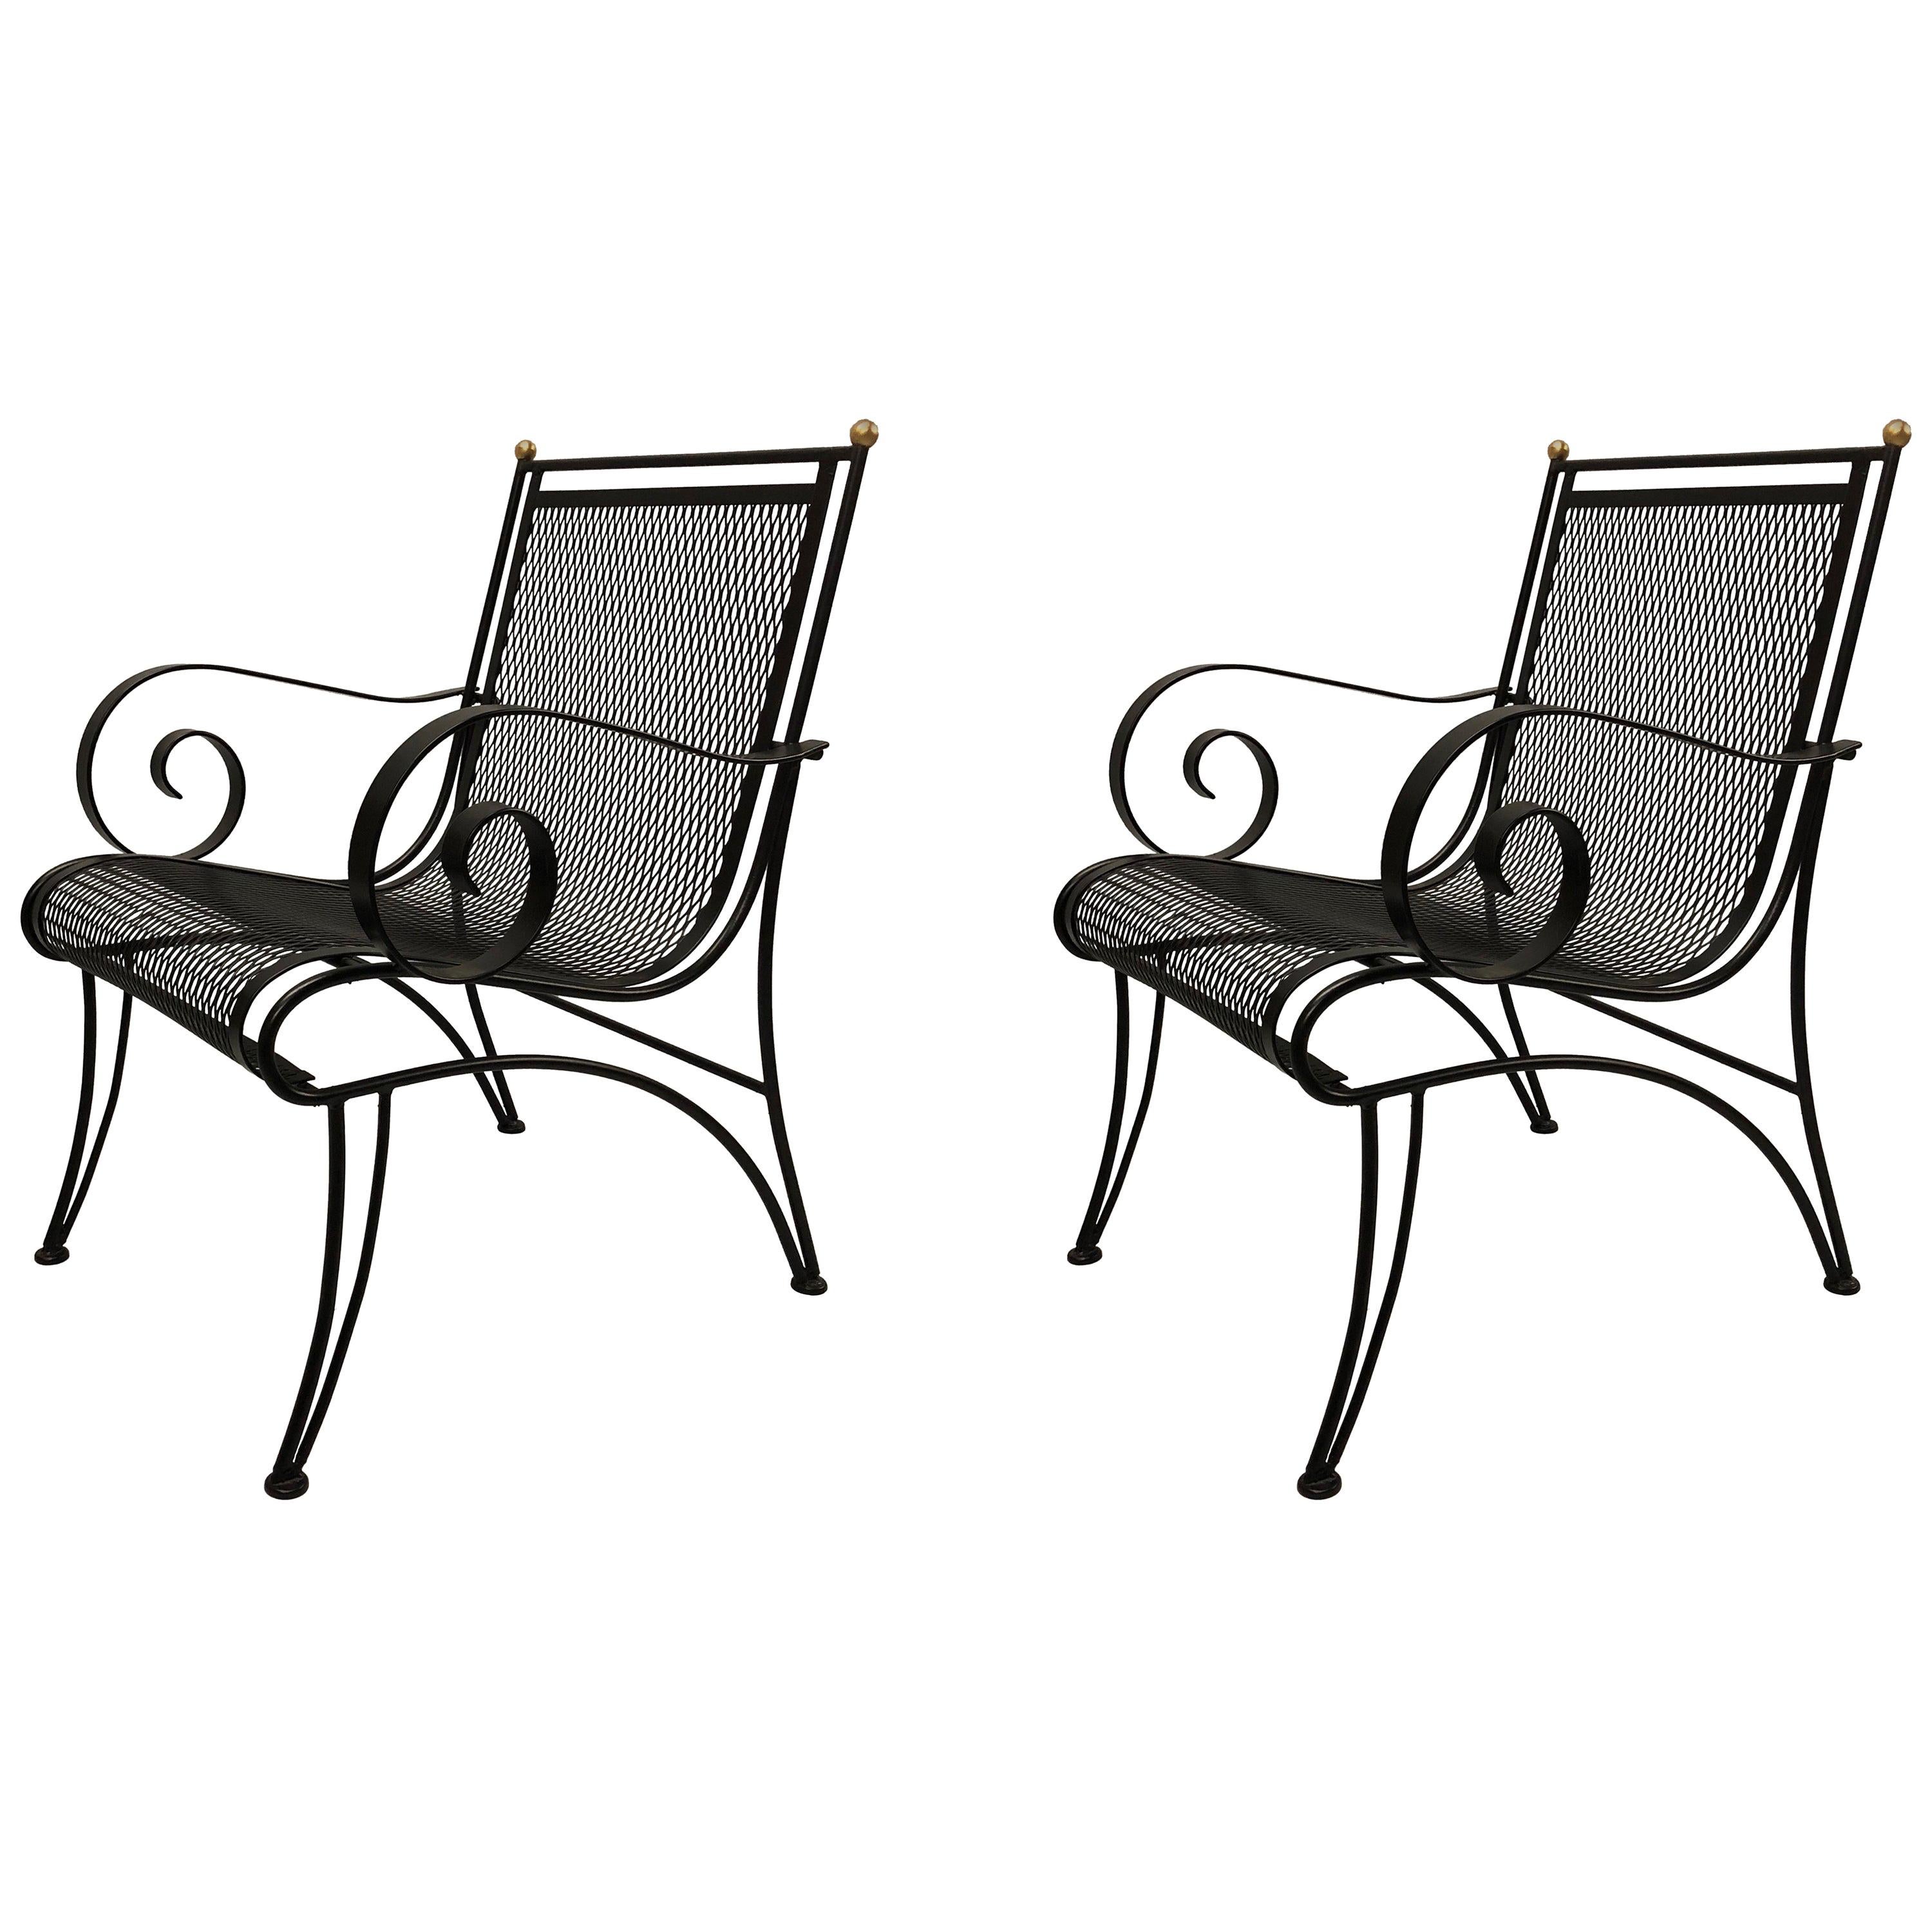 Midcentury Partial-Gilt Wrought Iron Lounge Chairs Attributed to René Prou, Pair